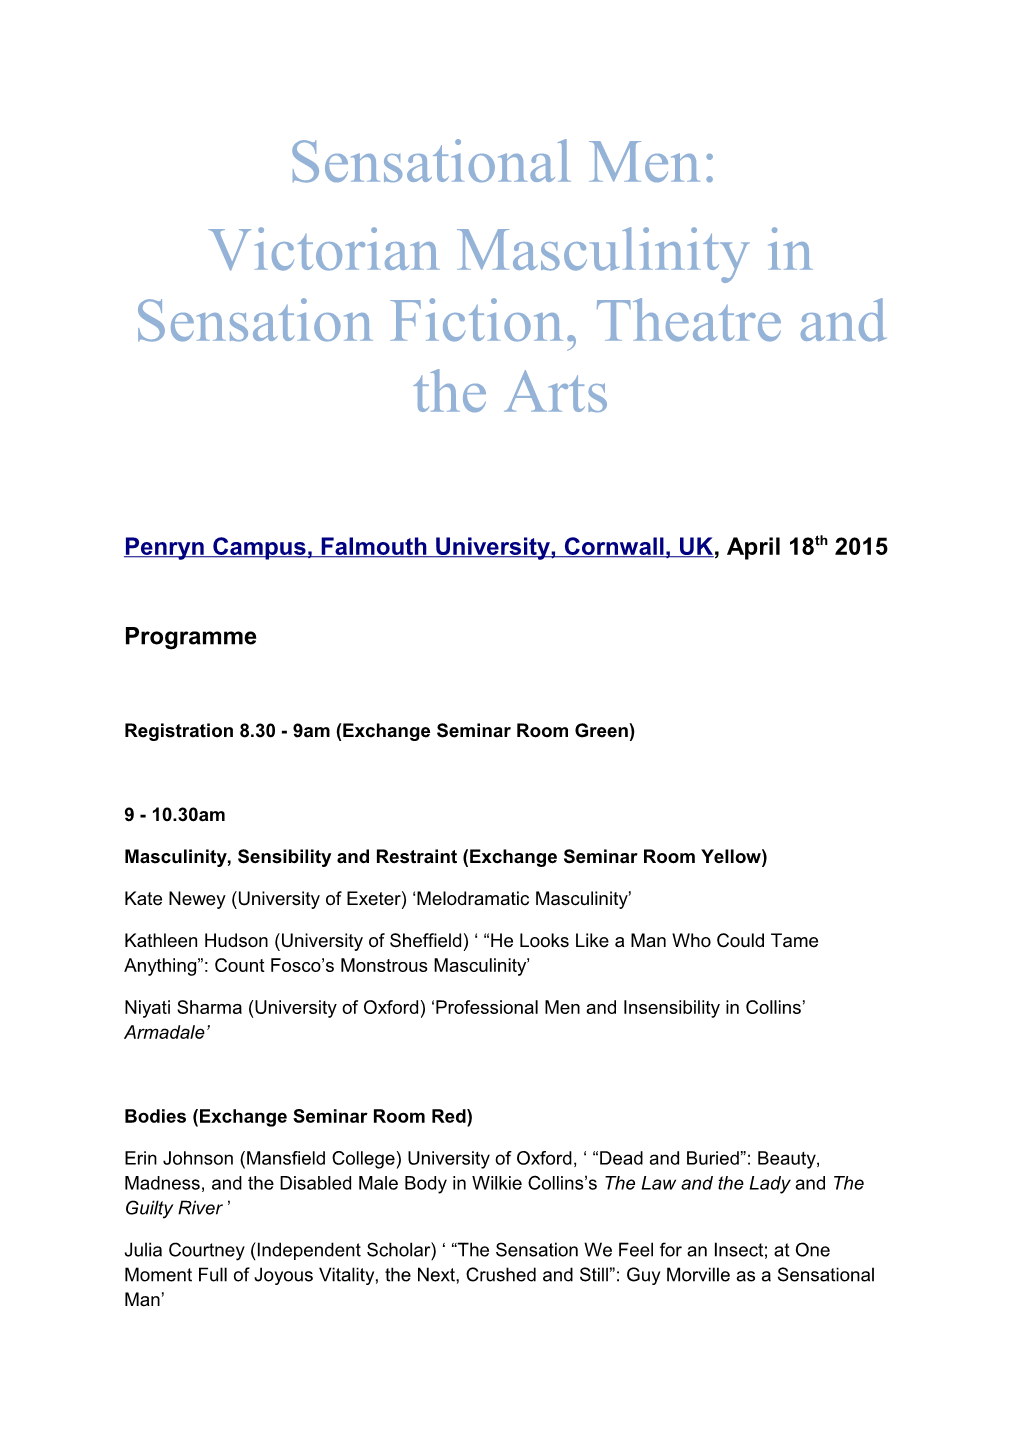 Victorian Masculinity in Sensation Fiction, Theatre and the Arts